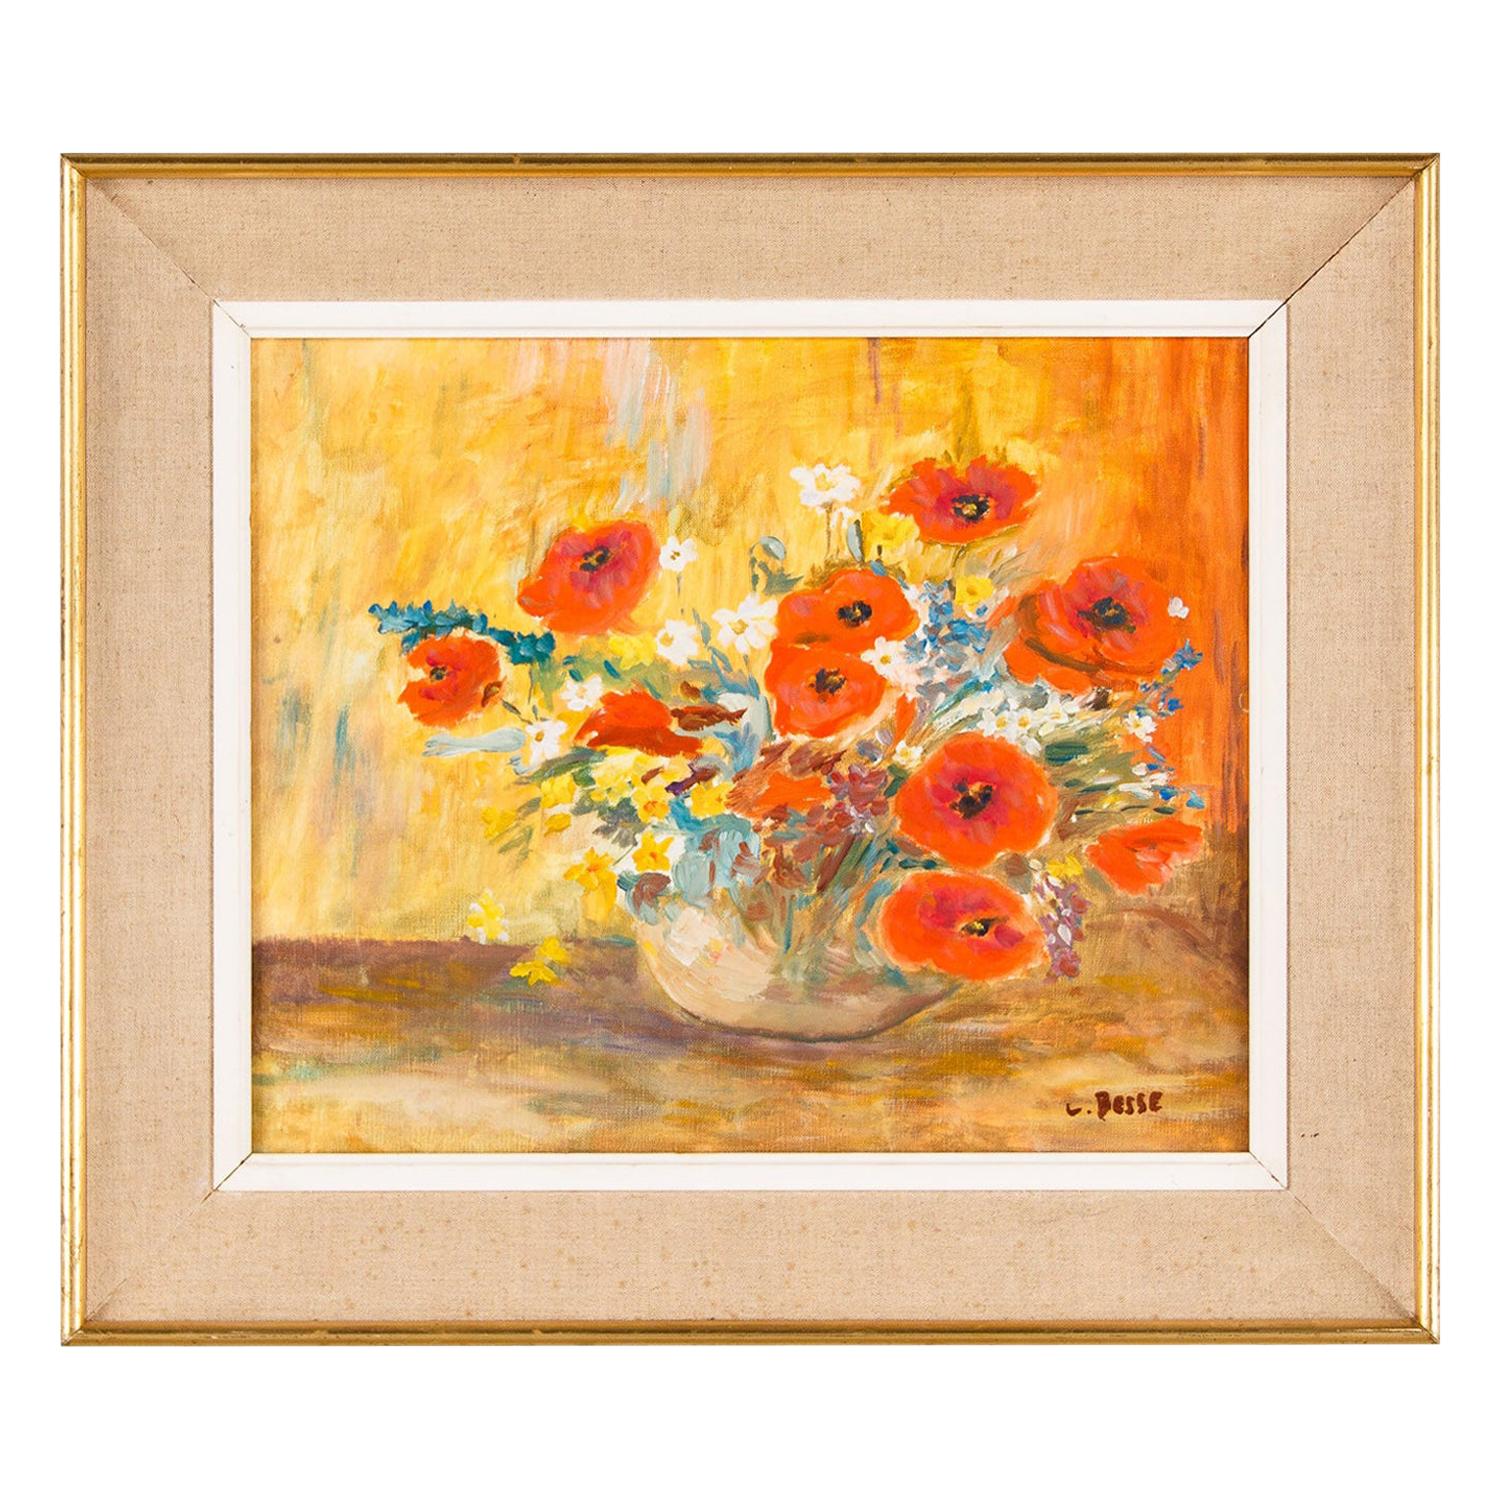 French Vintage Oil on Canvass of Poppies in a Vase, 20th Century